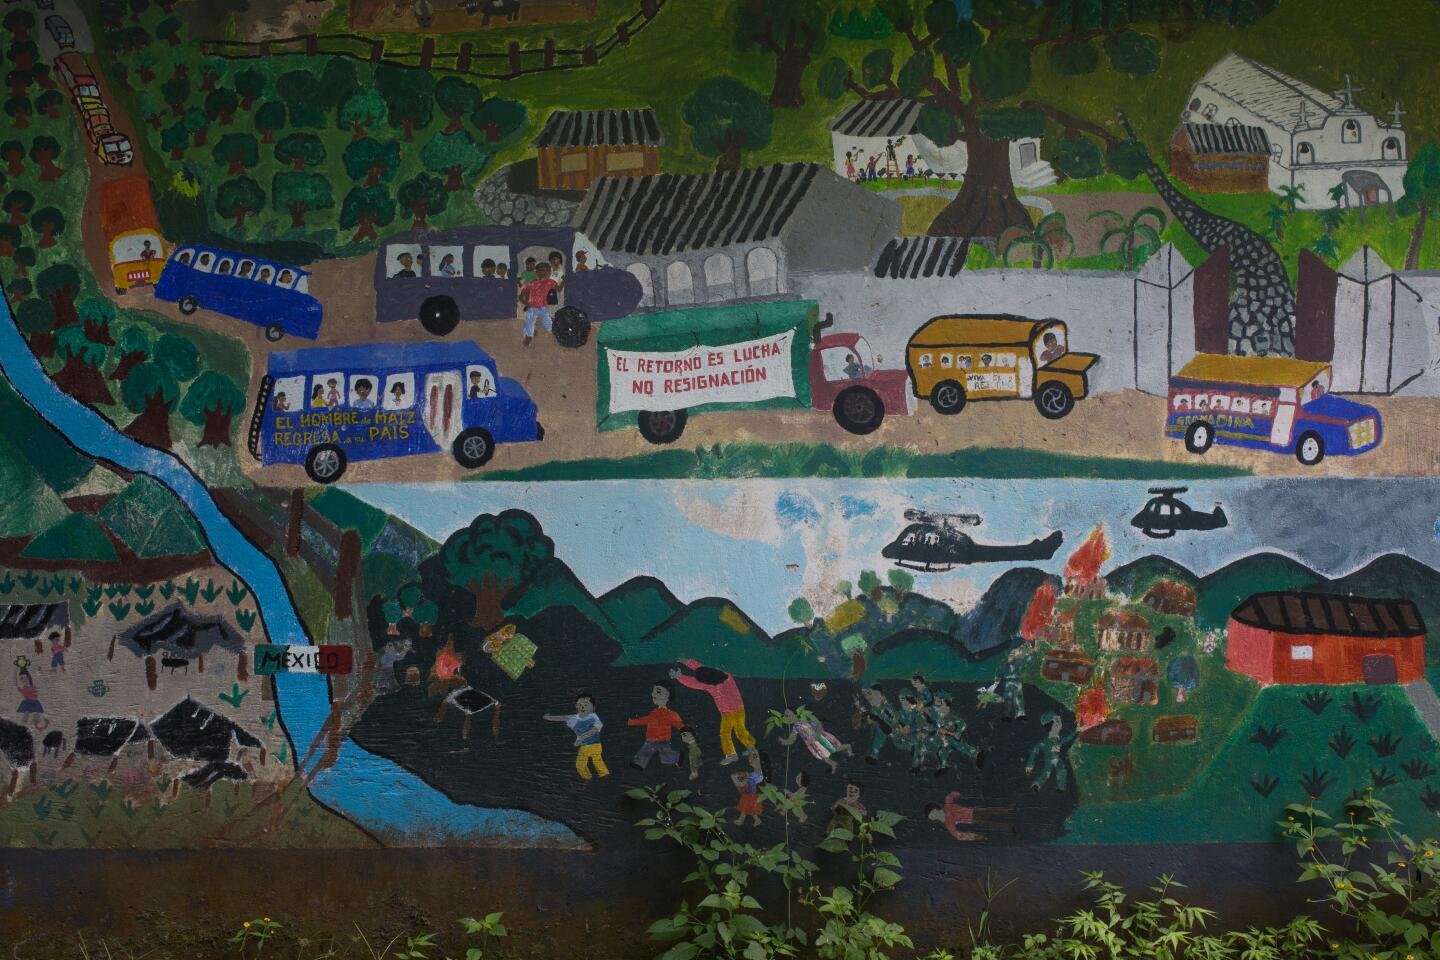 Mural in the central area of the community of La Trinidad